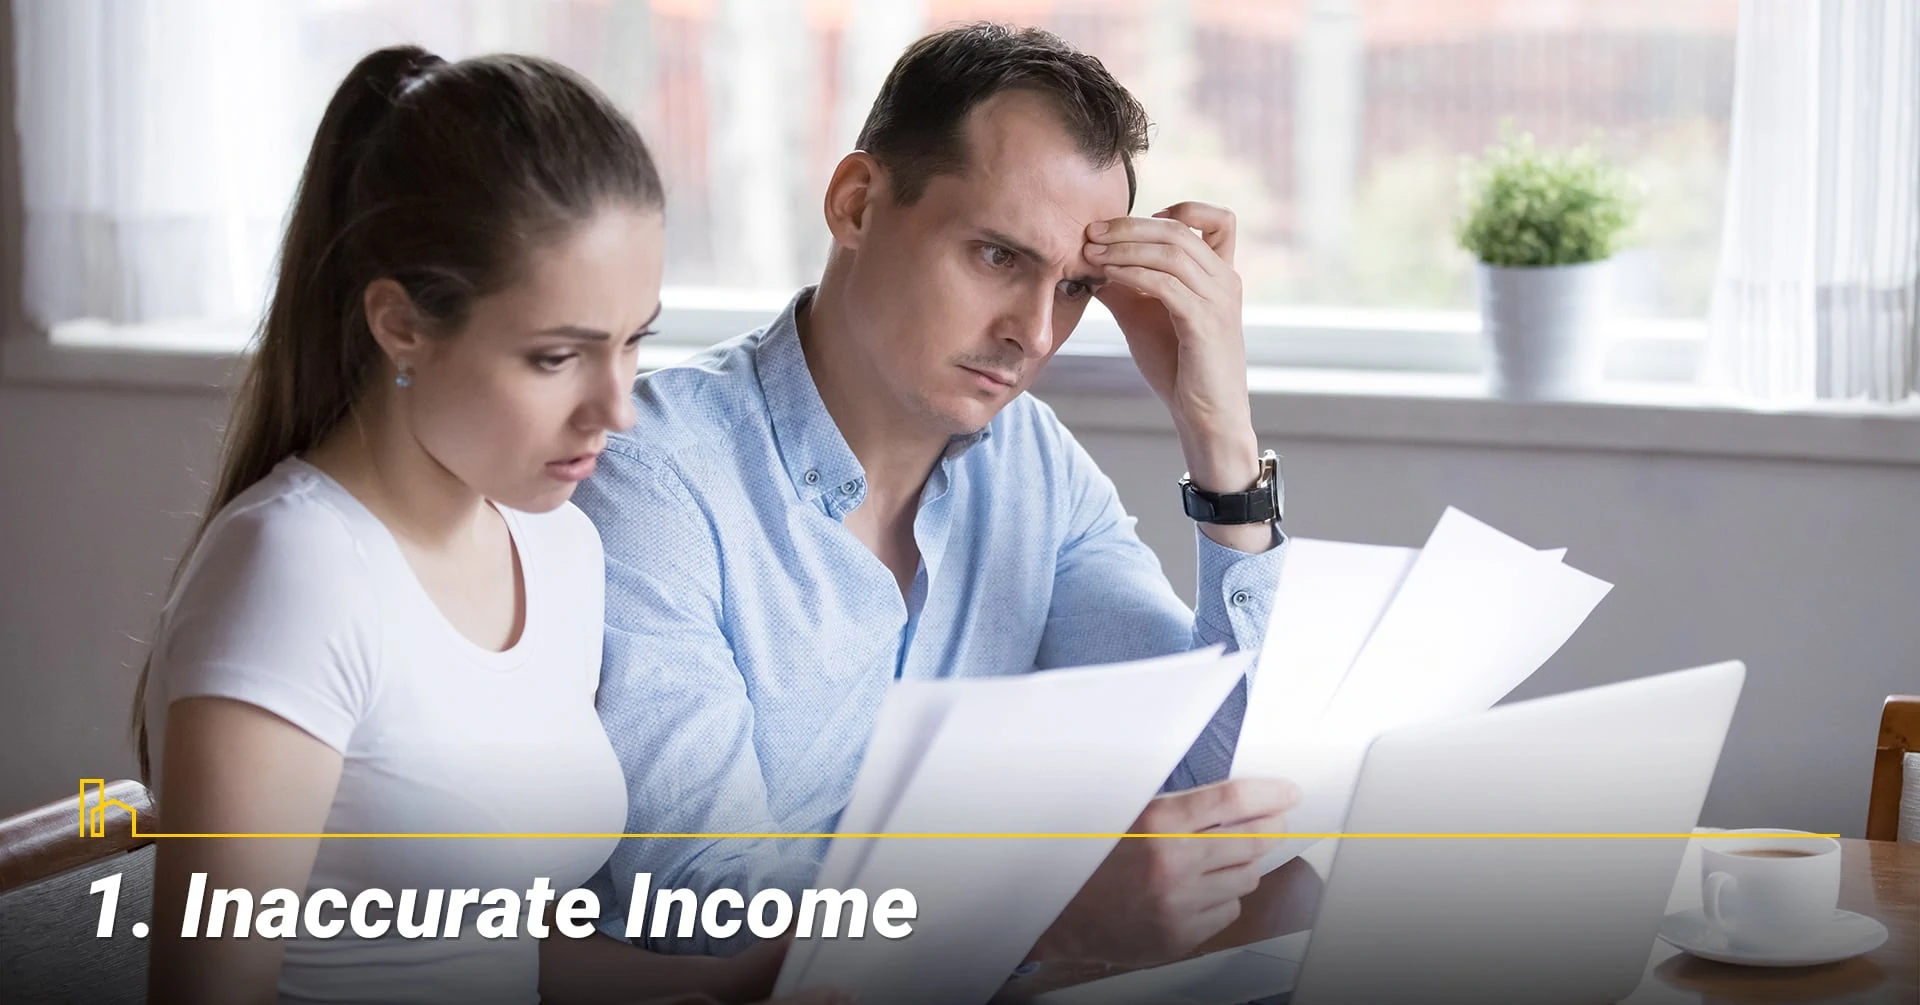 Inaccurate Income, wrong income